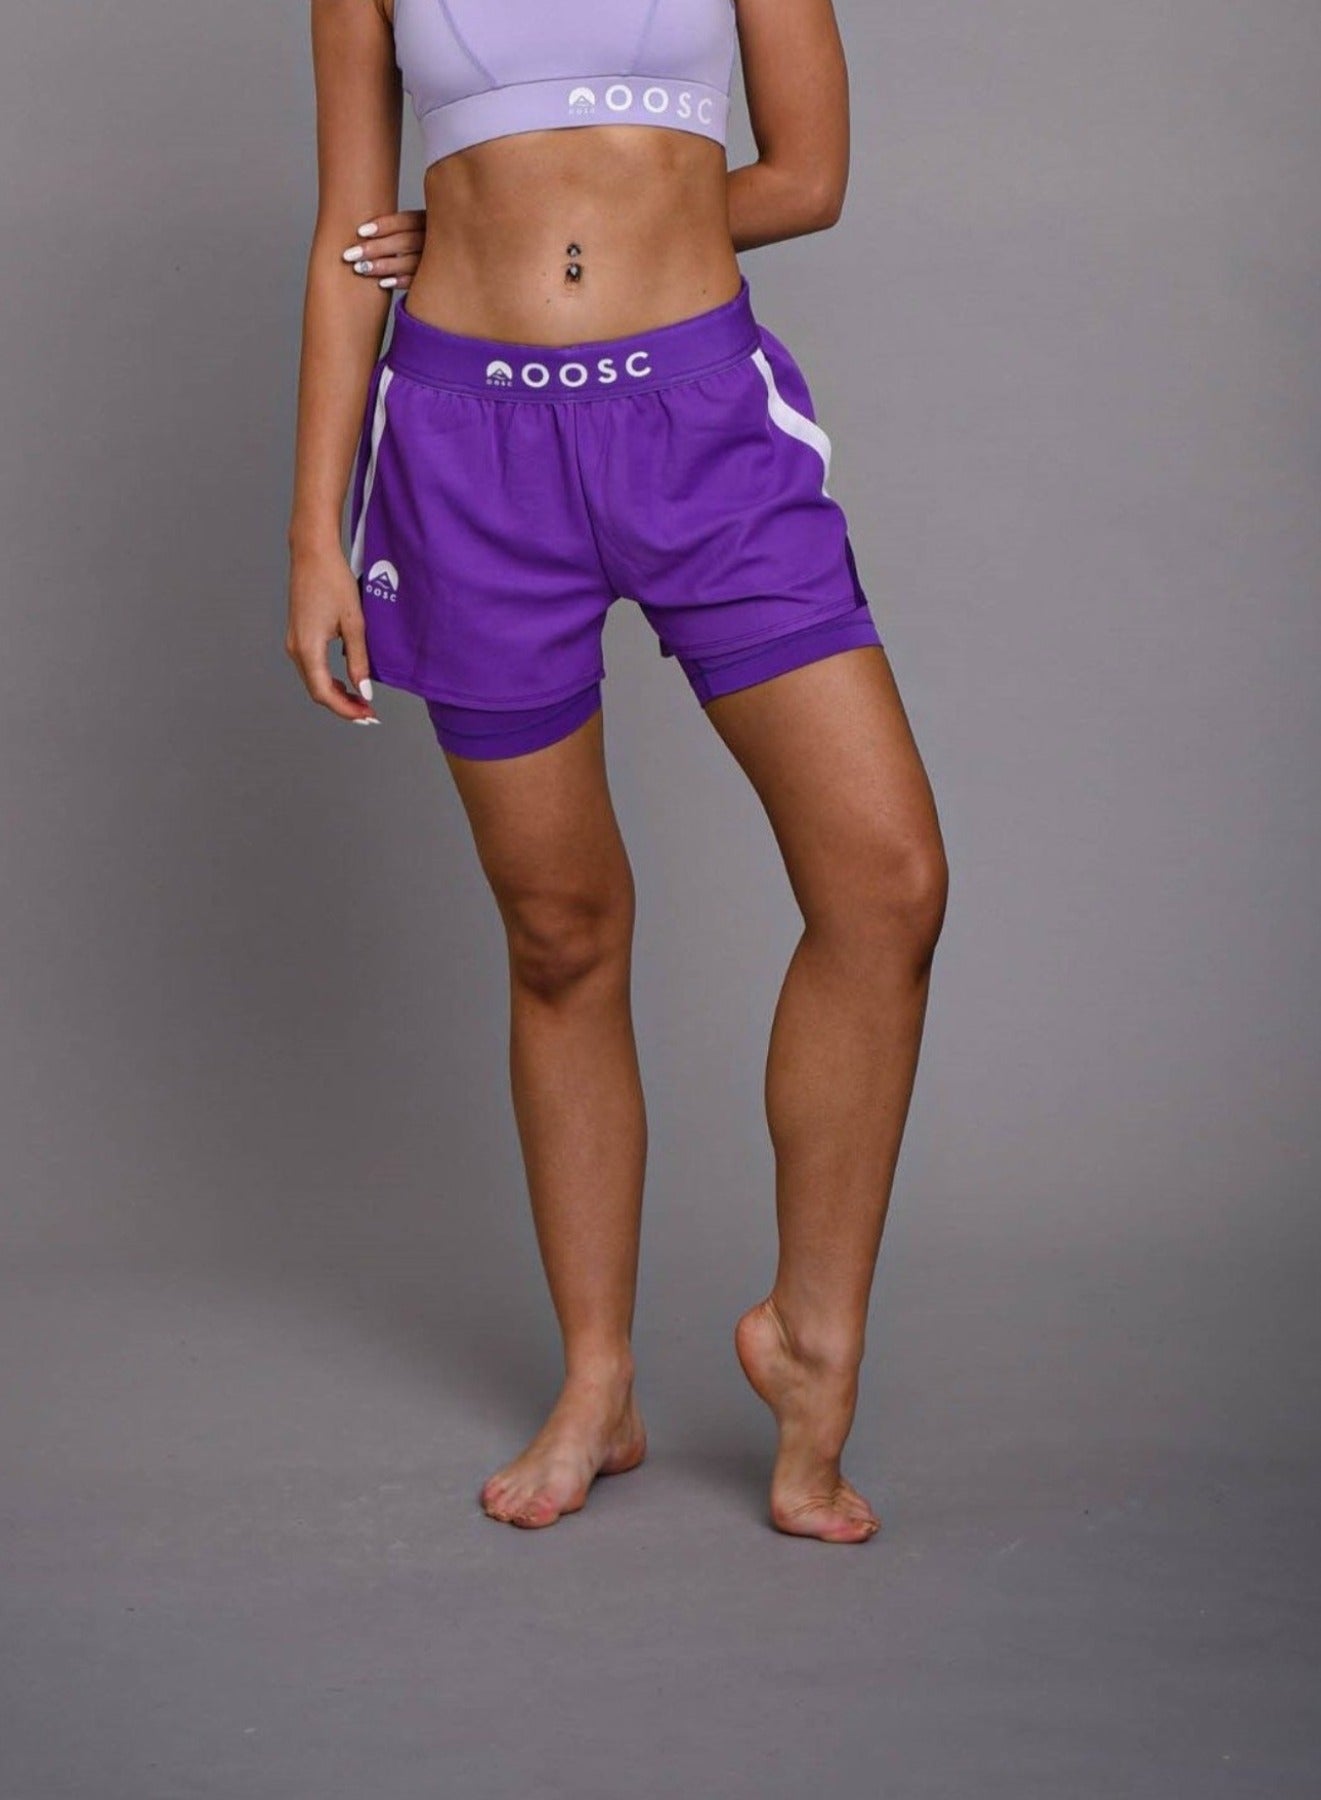 oosc womens purple 2in1 gym shorts